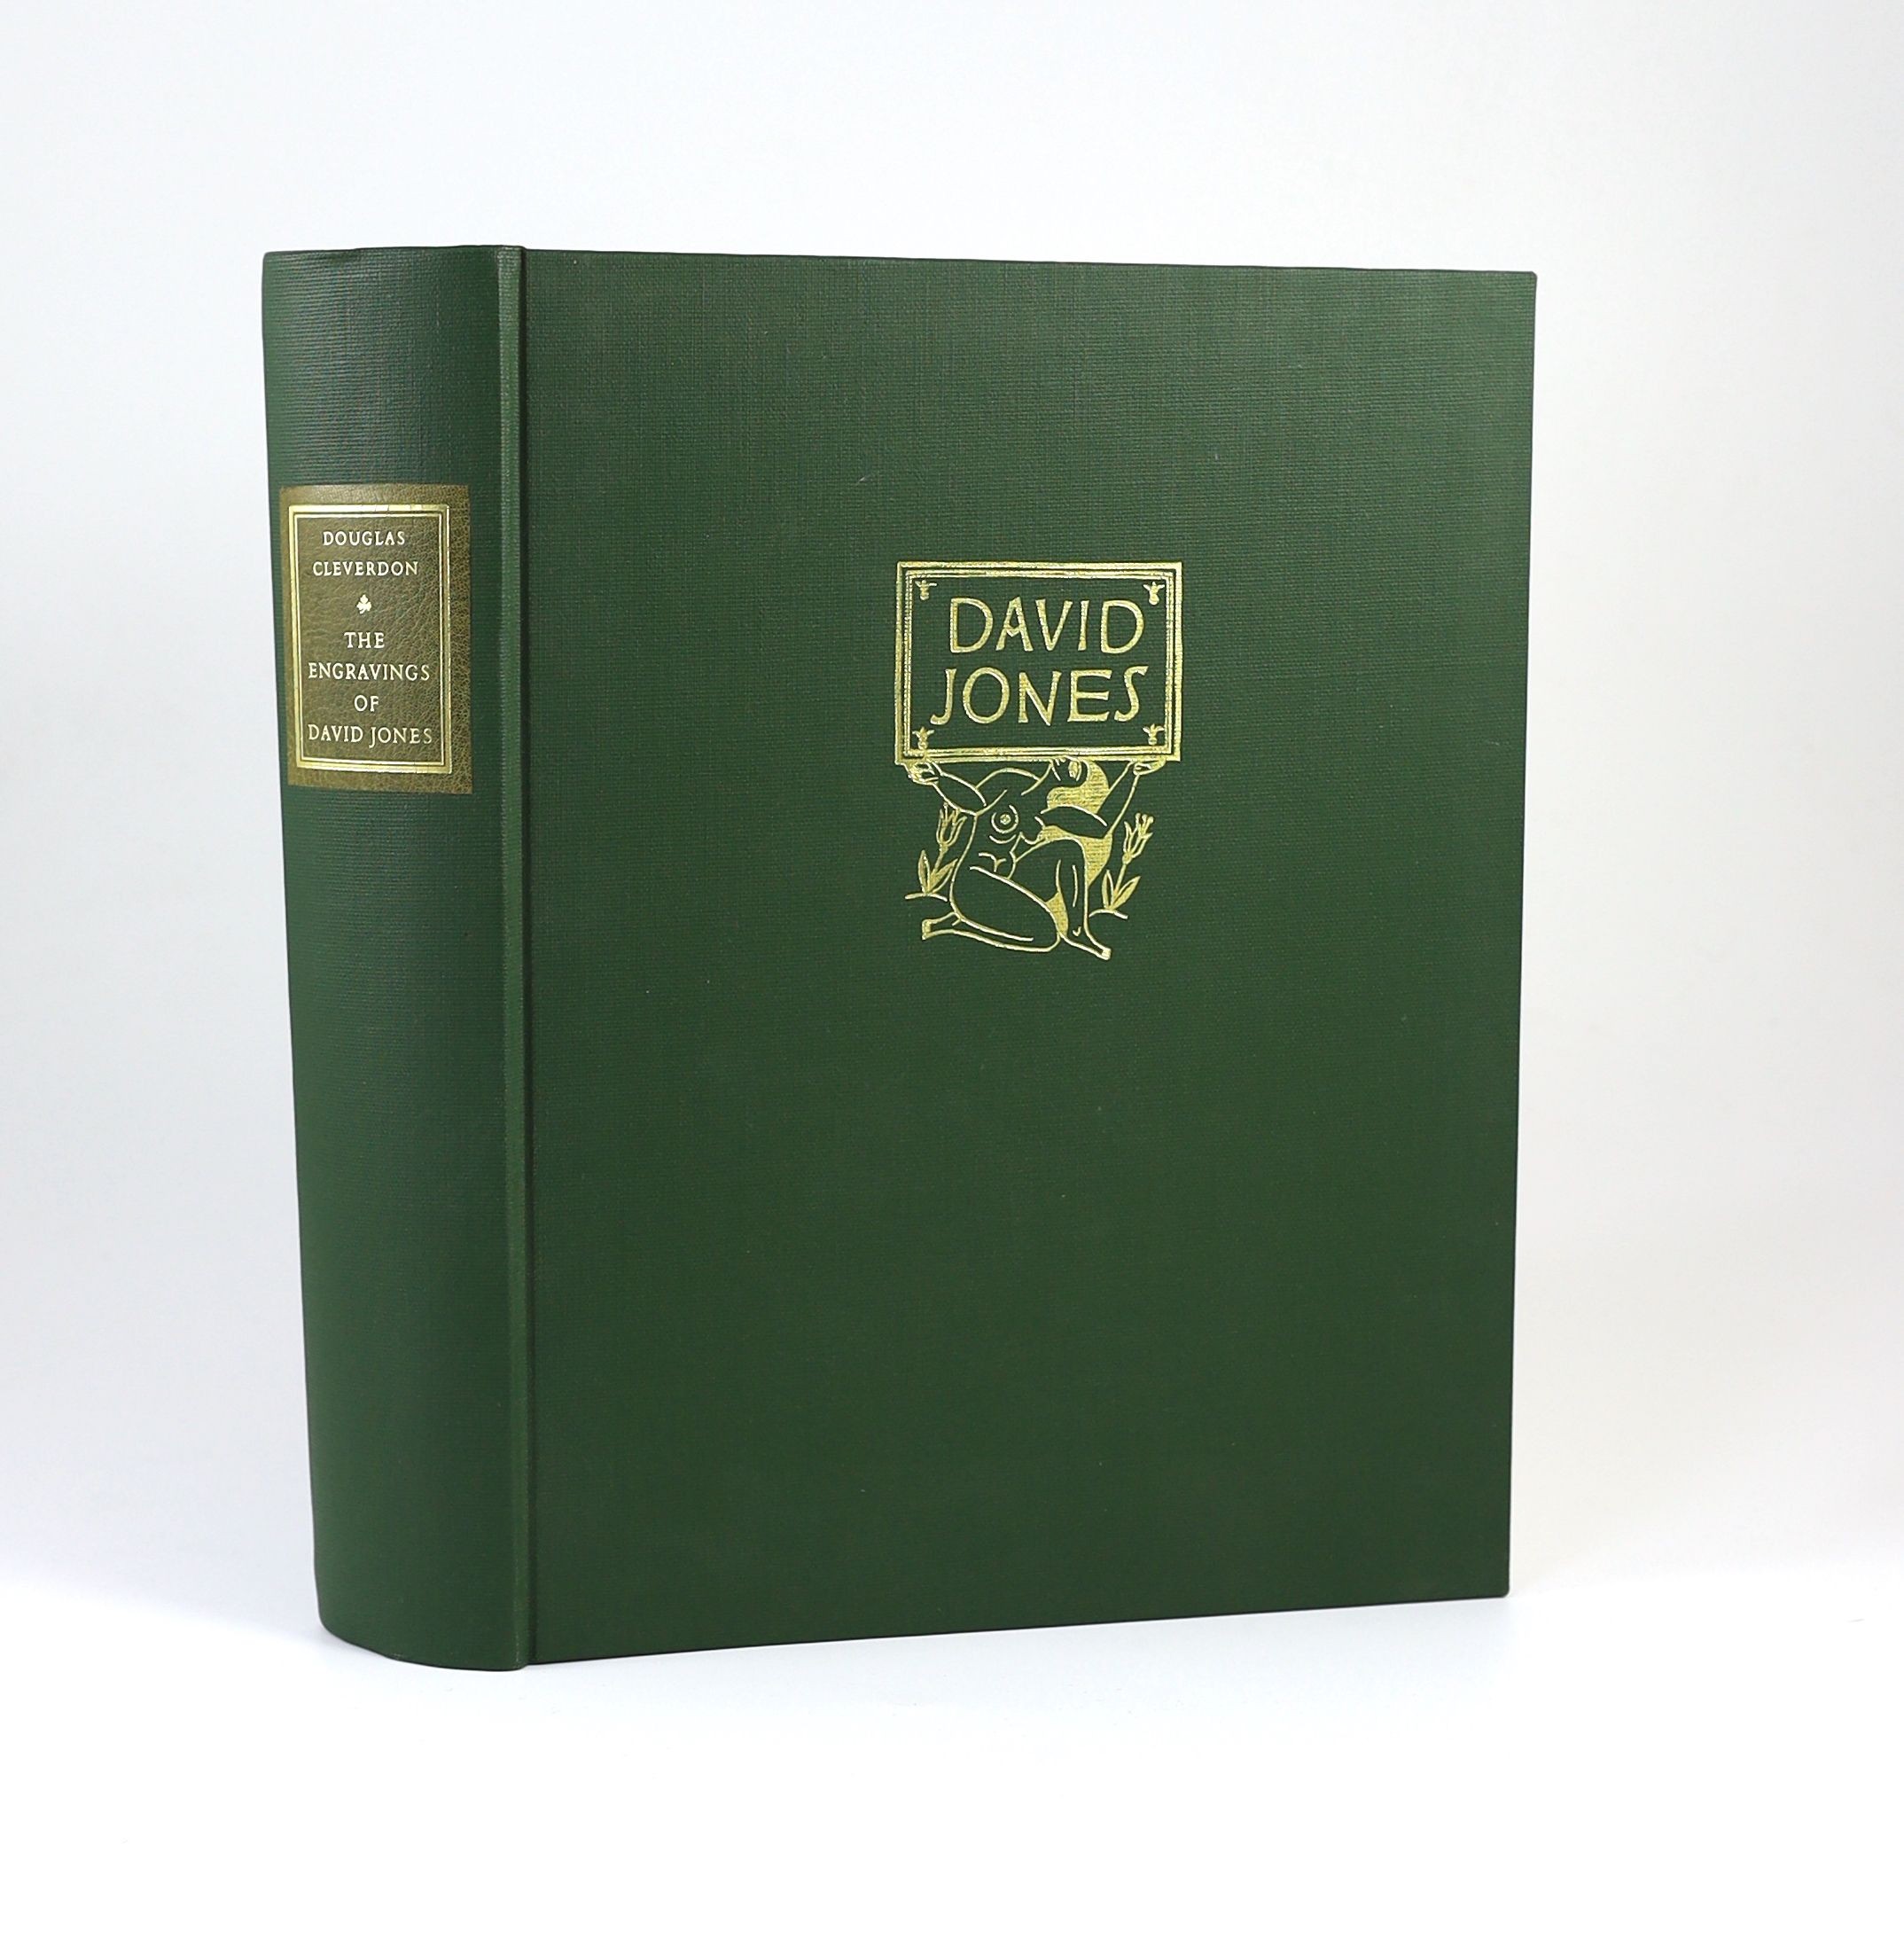 Cleverdon, Douglas - The Engravings of David Jones a Survey. 1st and limited edition, One of 260 copies printed on Vèlin d’Arches paper. Complete with the stated 96 plates, many of which are coloured, plus a tipped-in fr